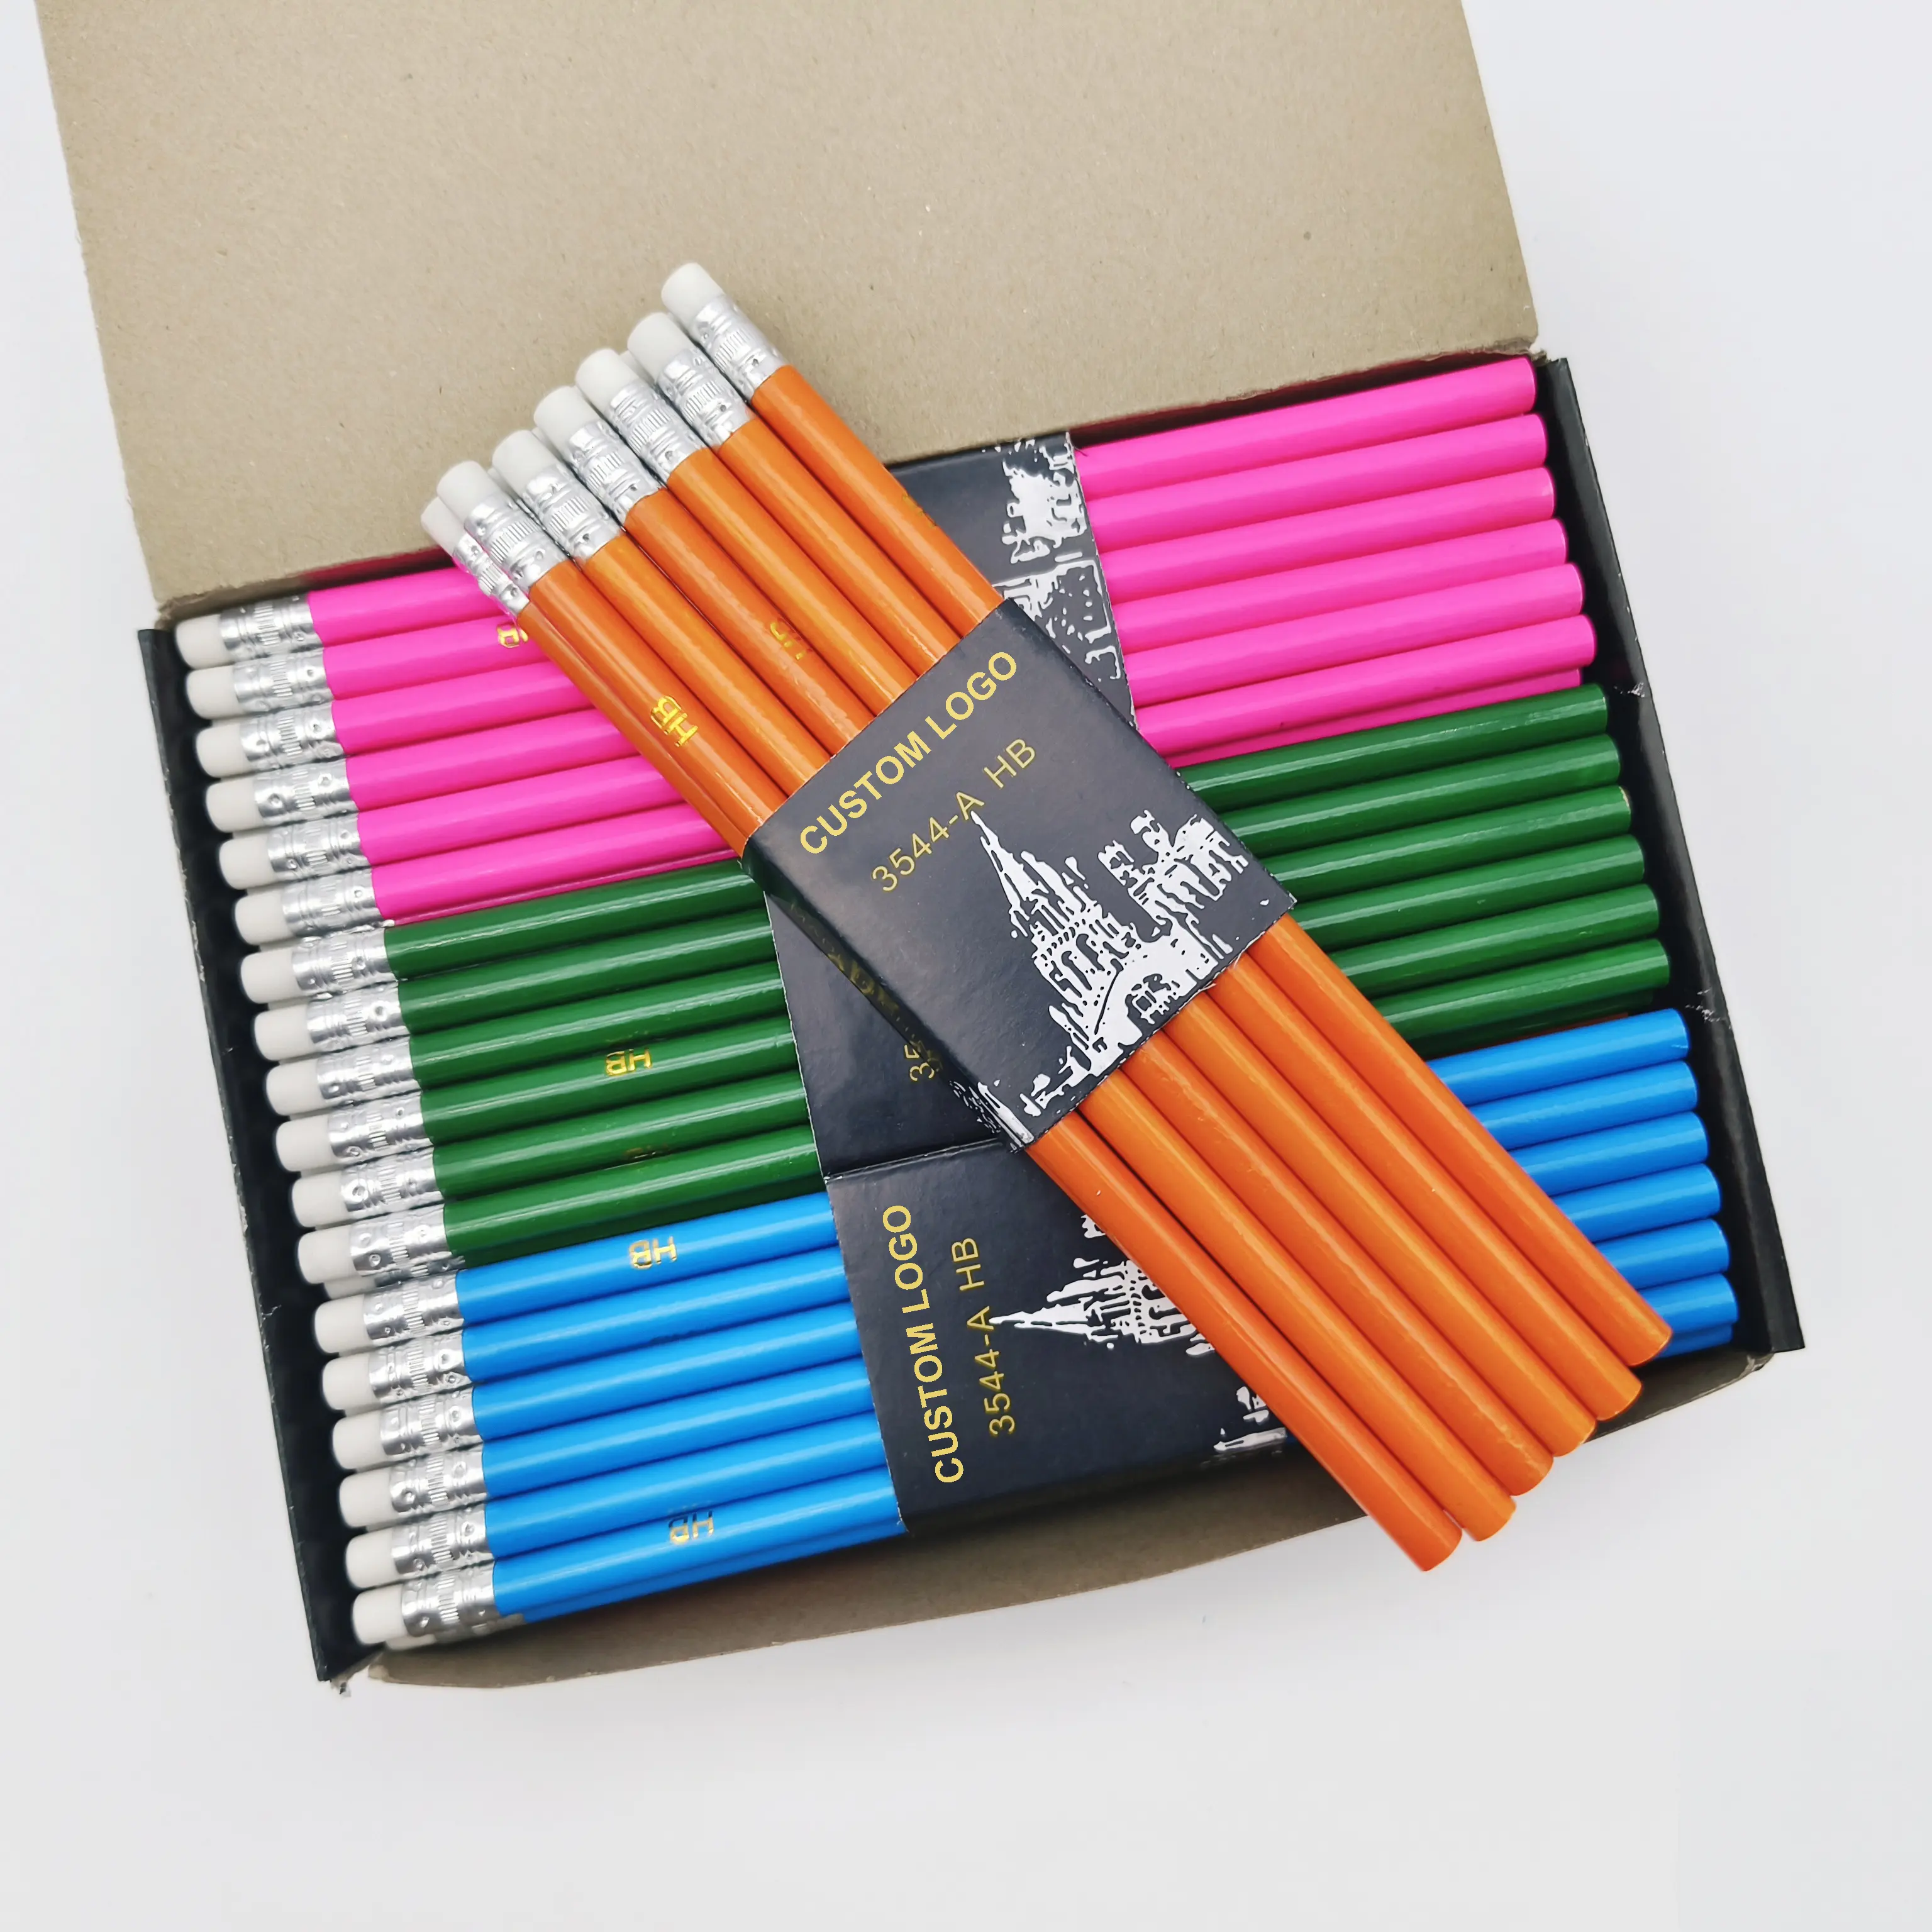 Factory Wholesale Promotional HB pencils for School and Work Stationery OEM Logo and package